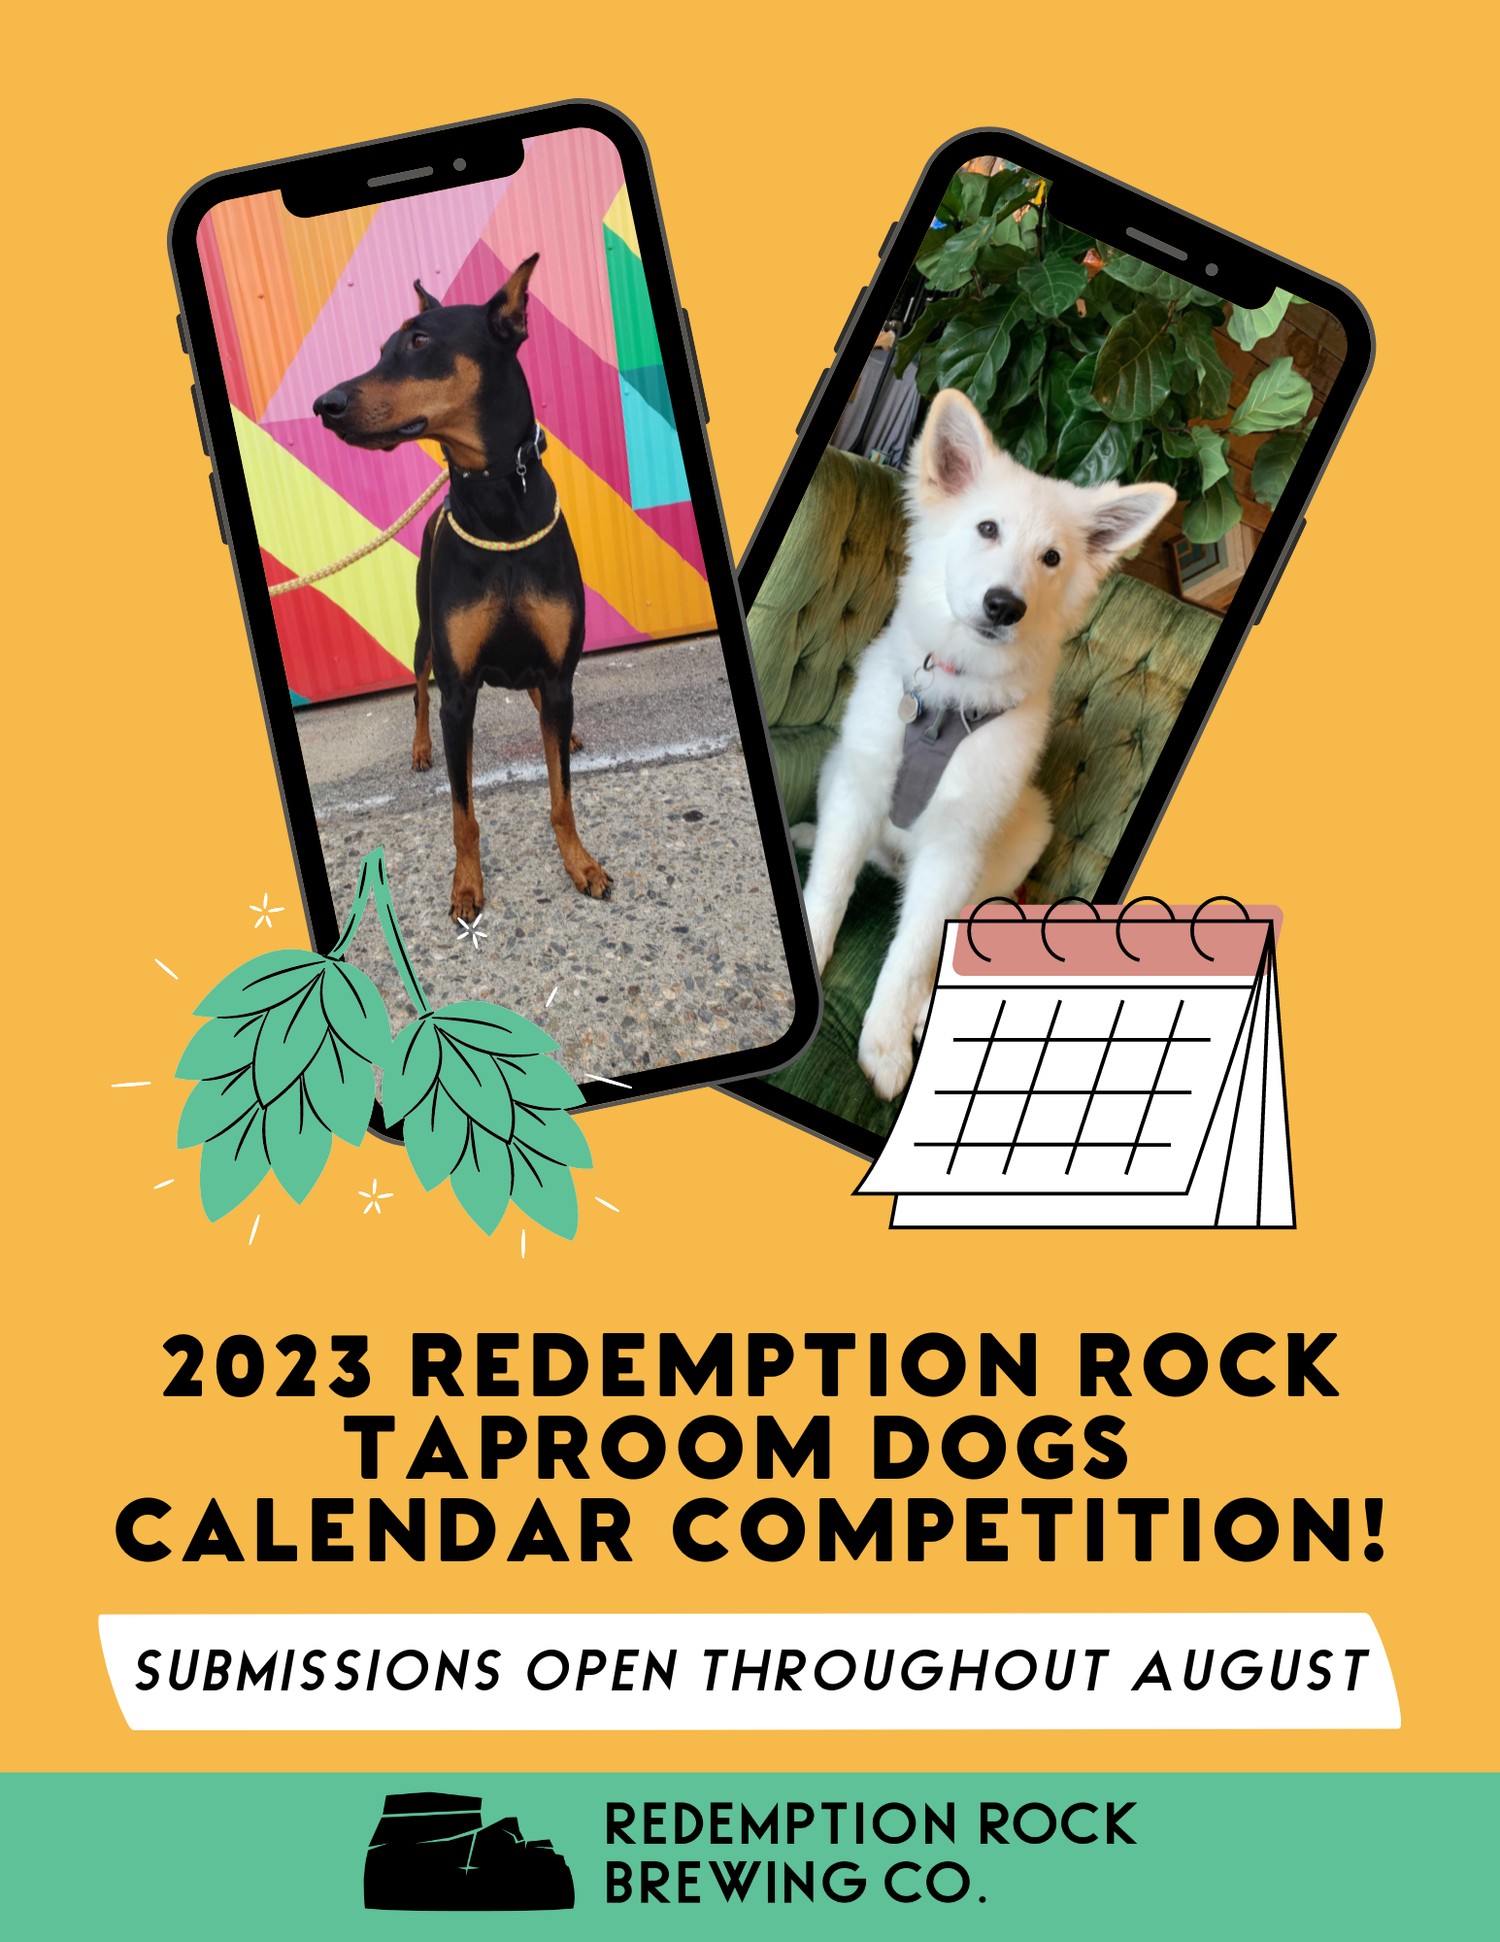 the-2023-redemption-rock-taproom-dogs-calendar-competition-is-open-redemption-rock-brewing-co